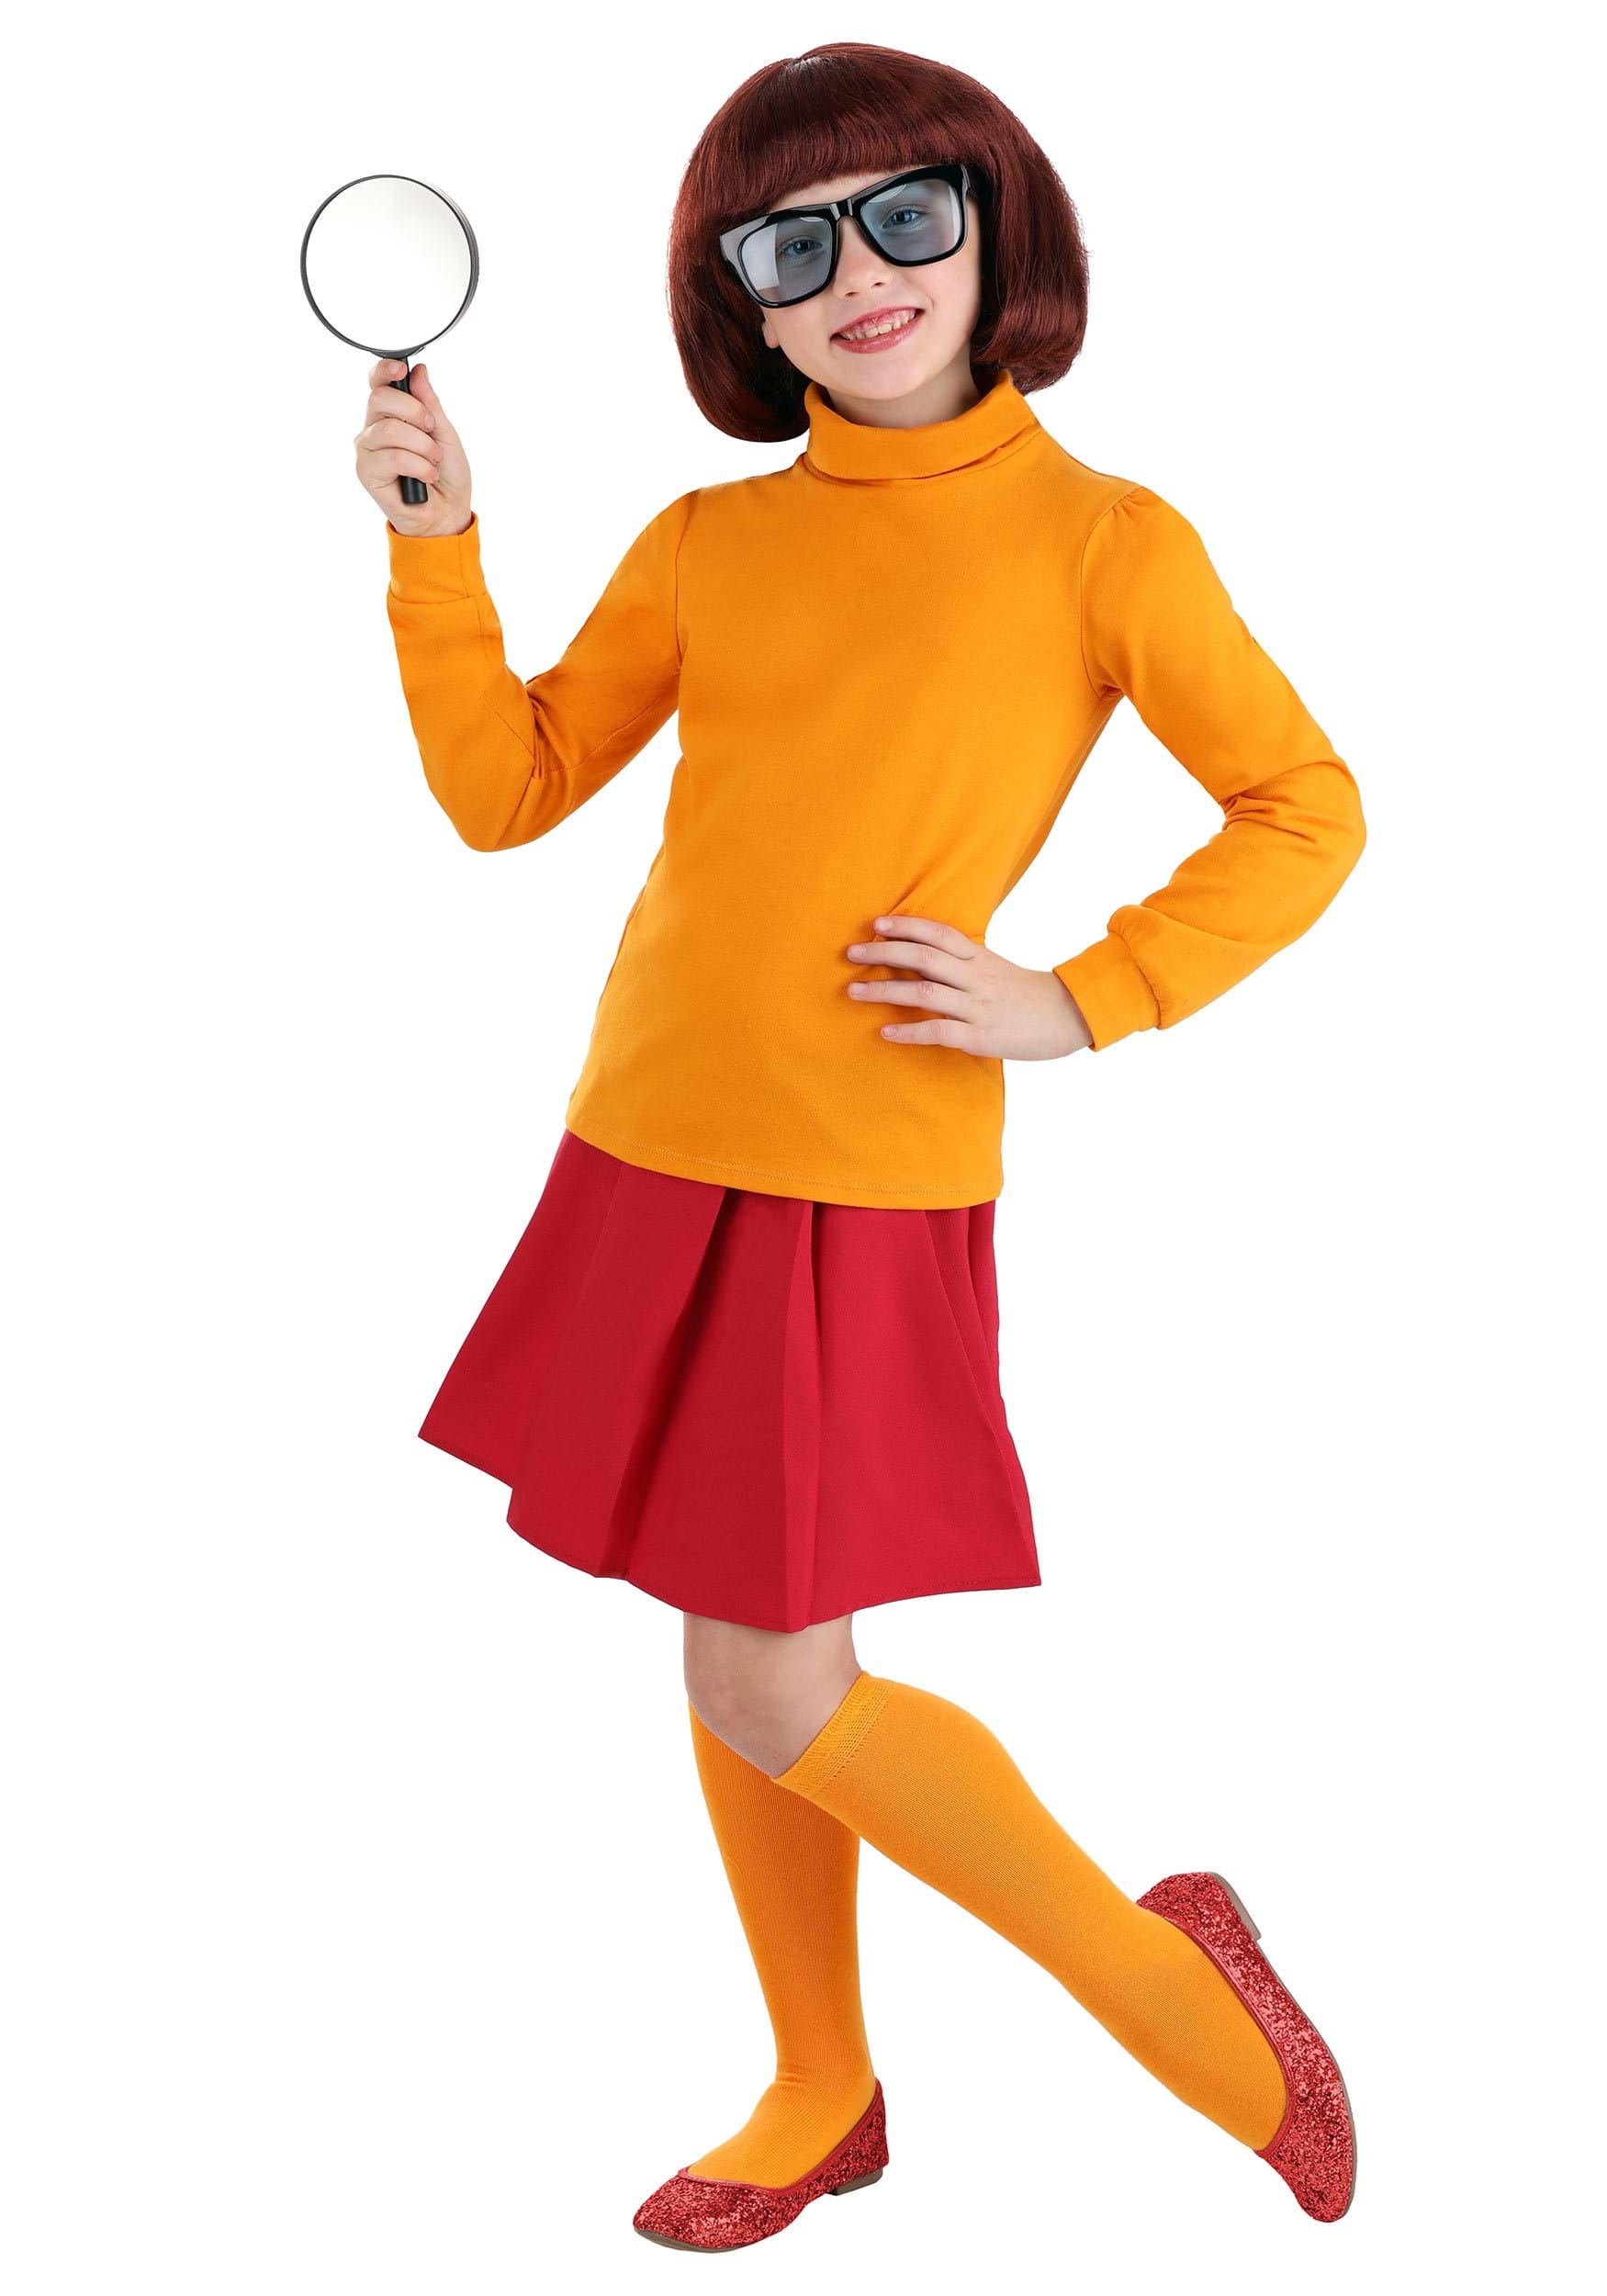 ajaz qureshi recommends images of velma from scooby doo pic